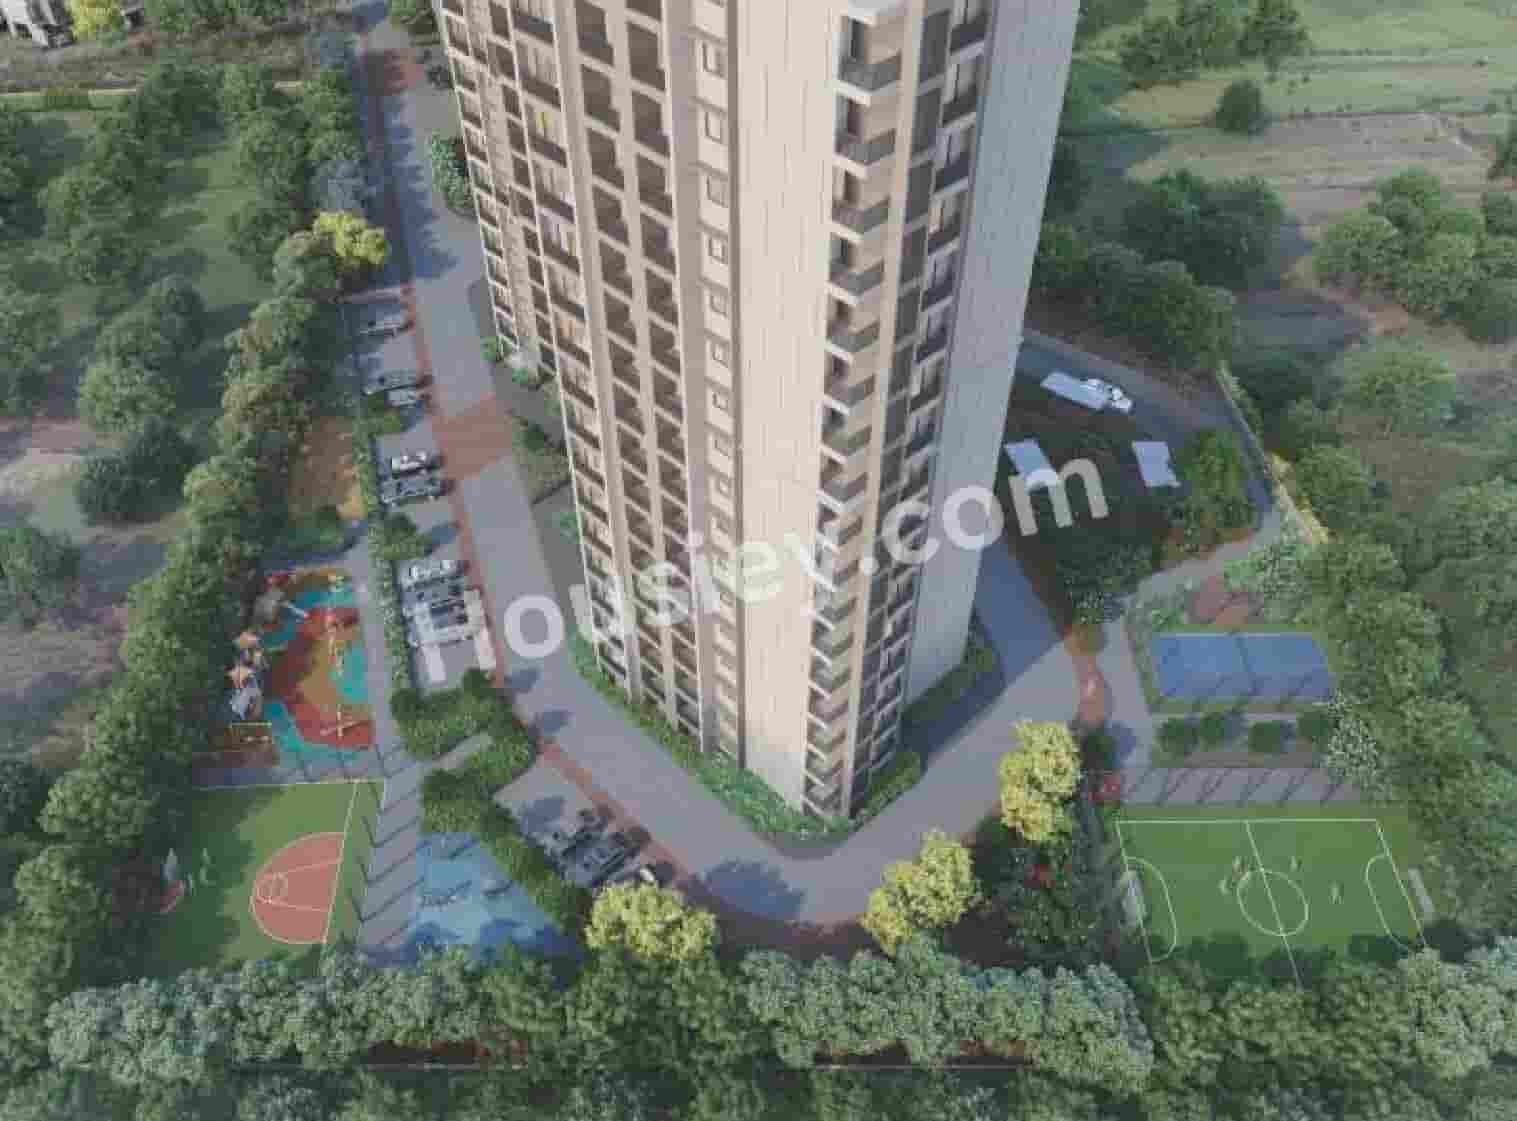 Goyal Orchid Bloomsberry Bangalore